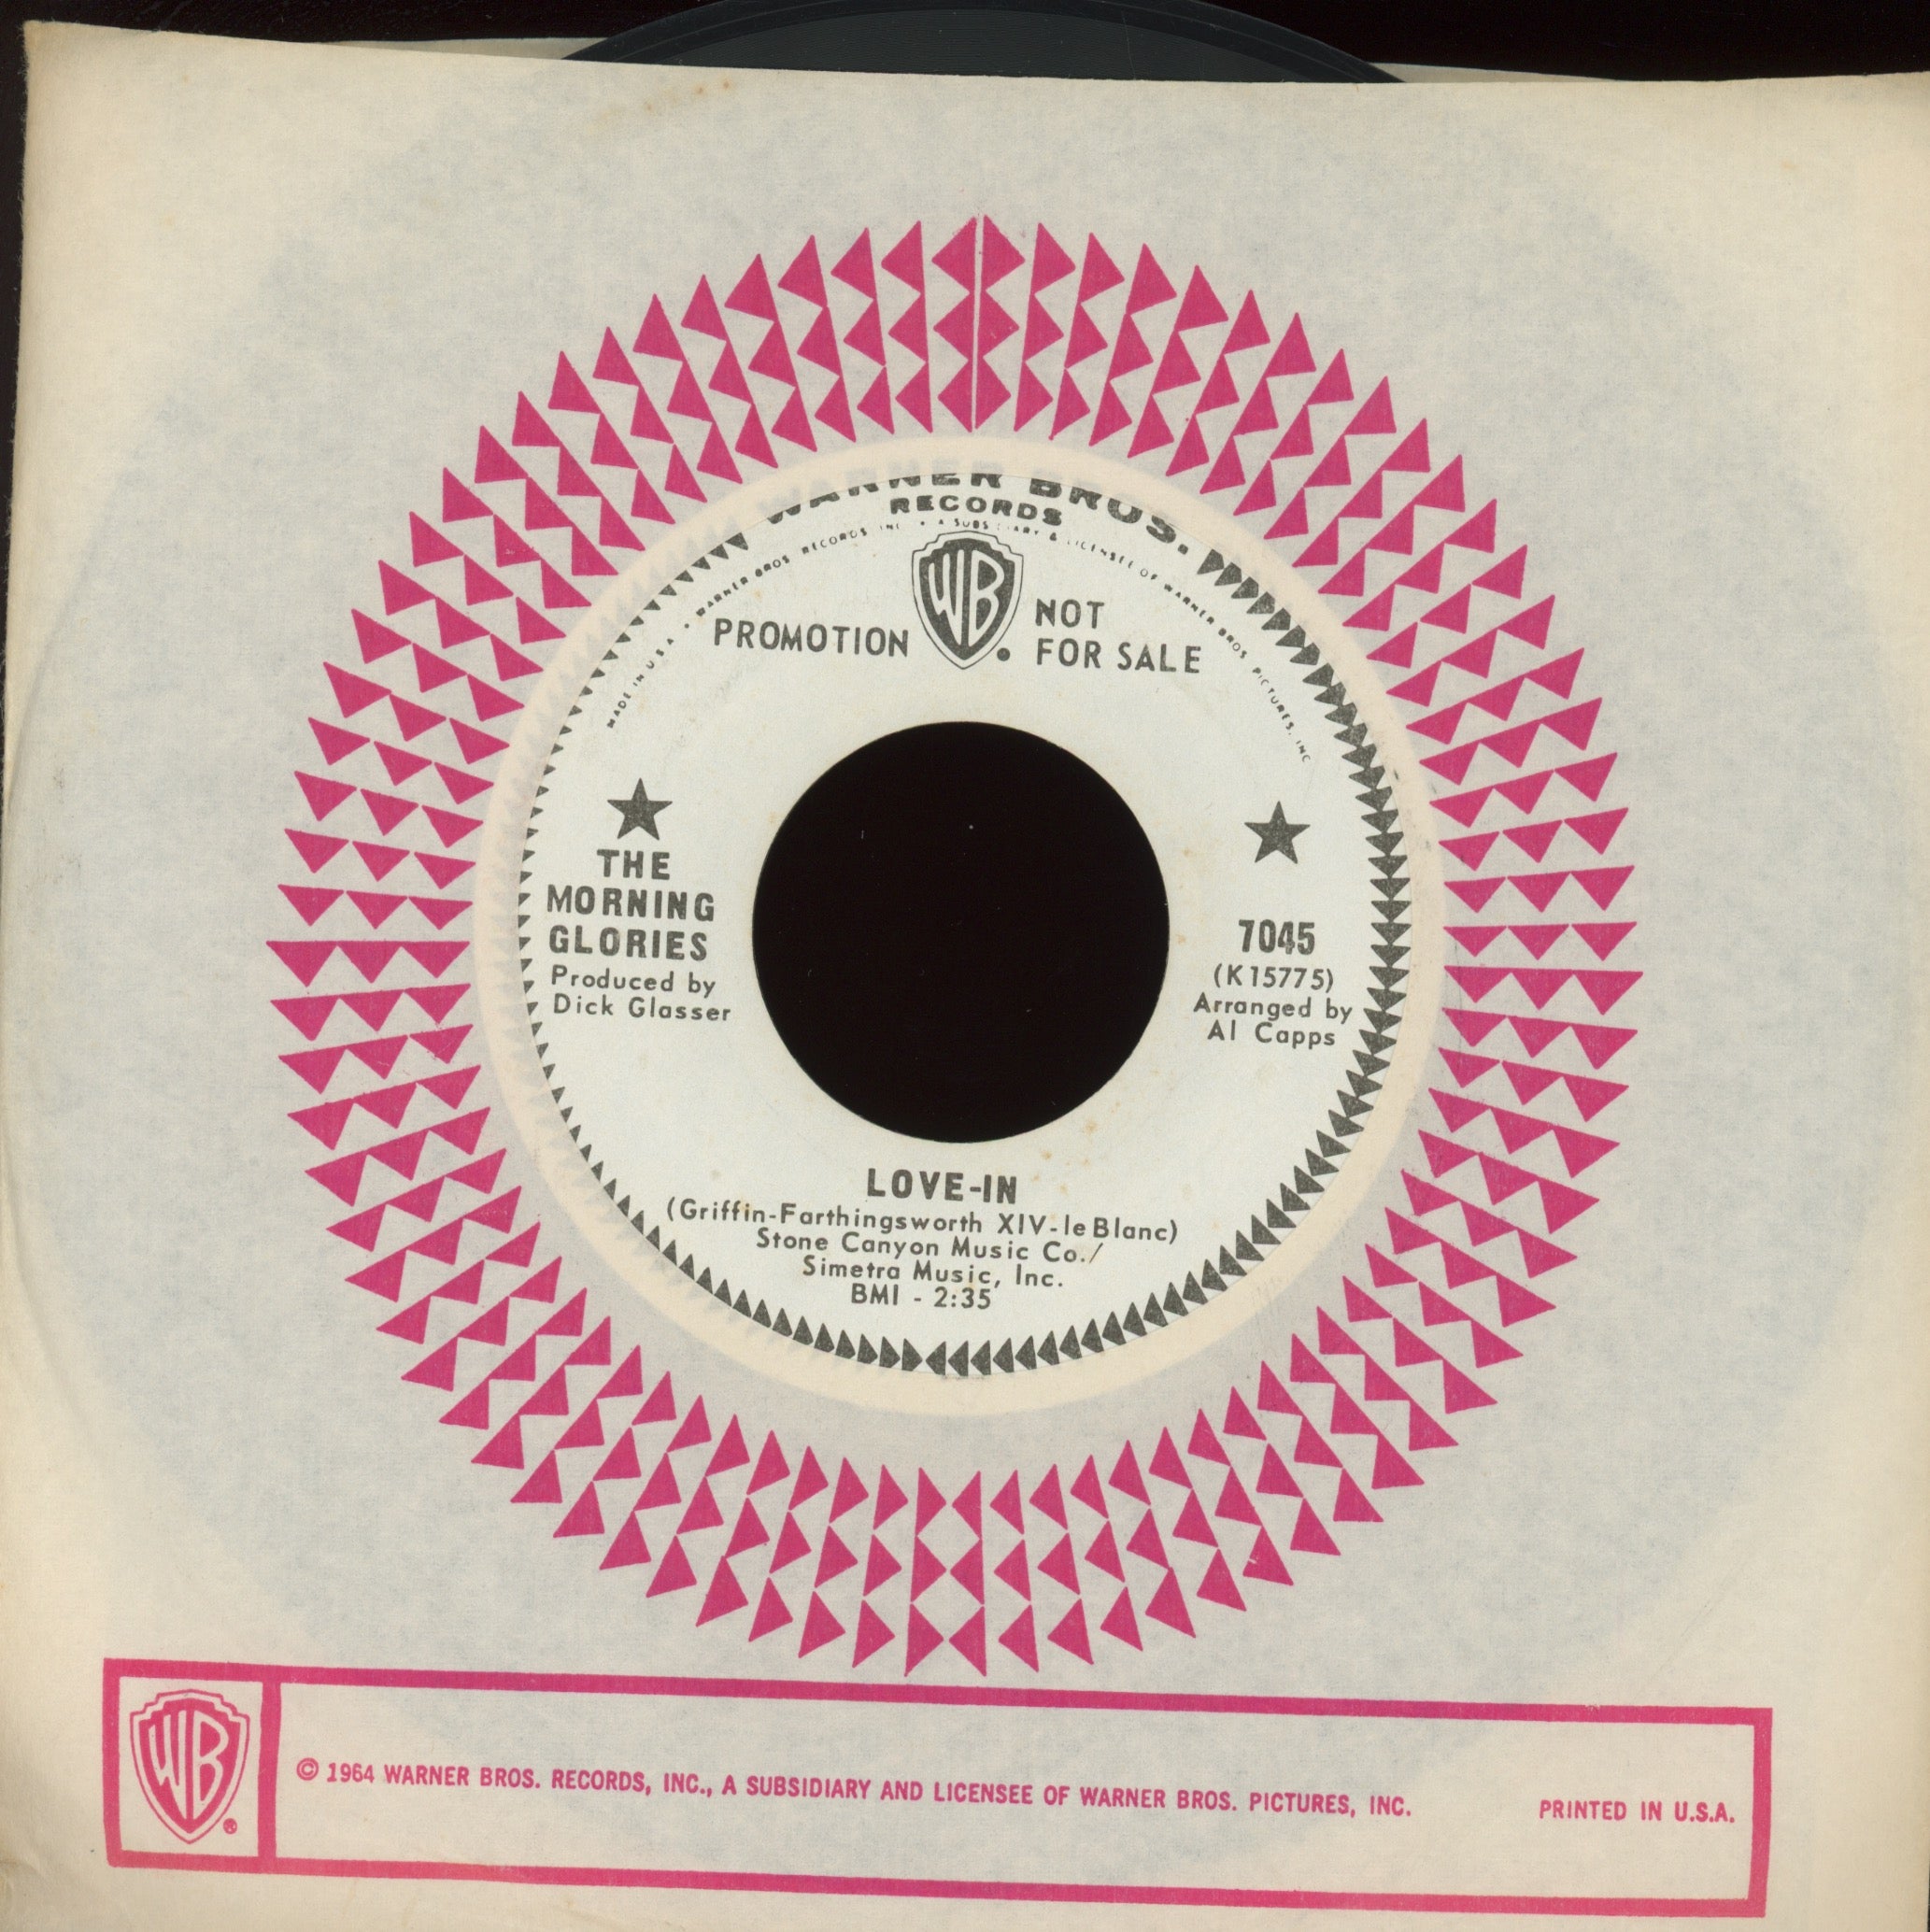 The Morning Glories - Love-In on WB Promo Pop Psych 45